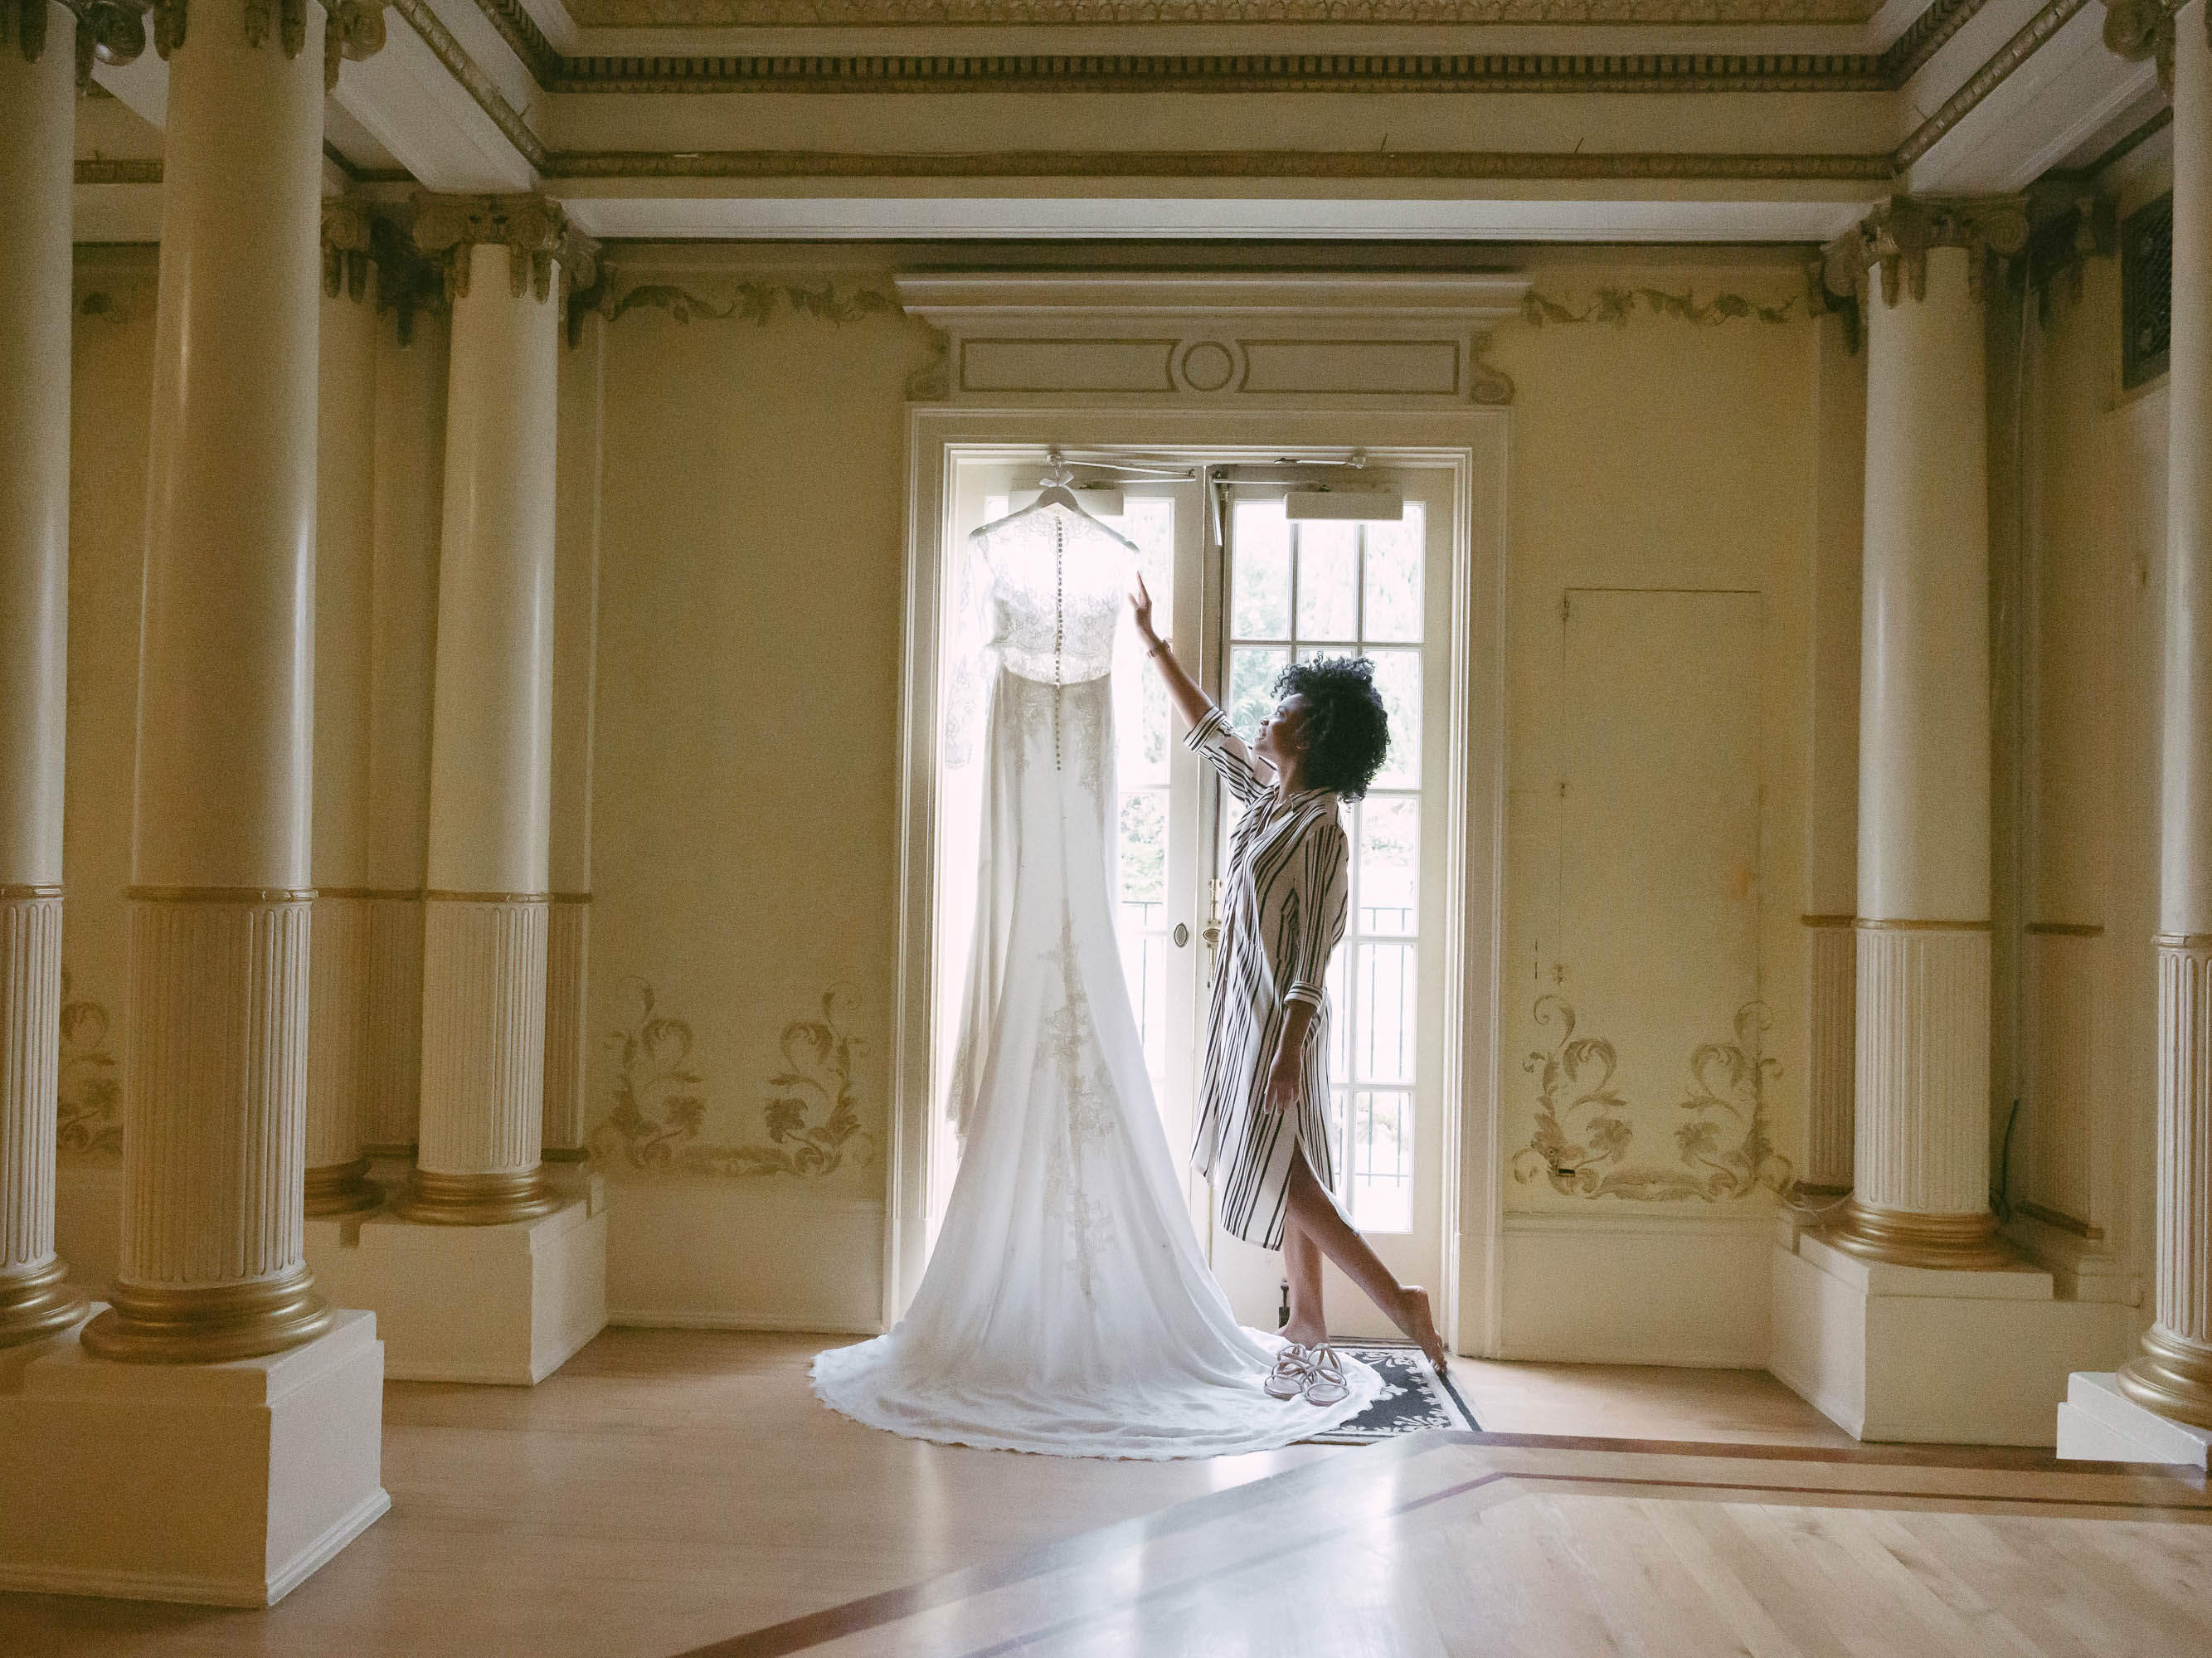 A bride is hanging her wedding dress in an ornate room.